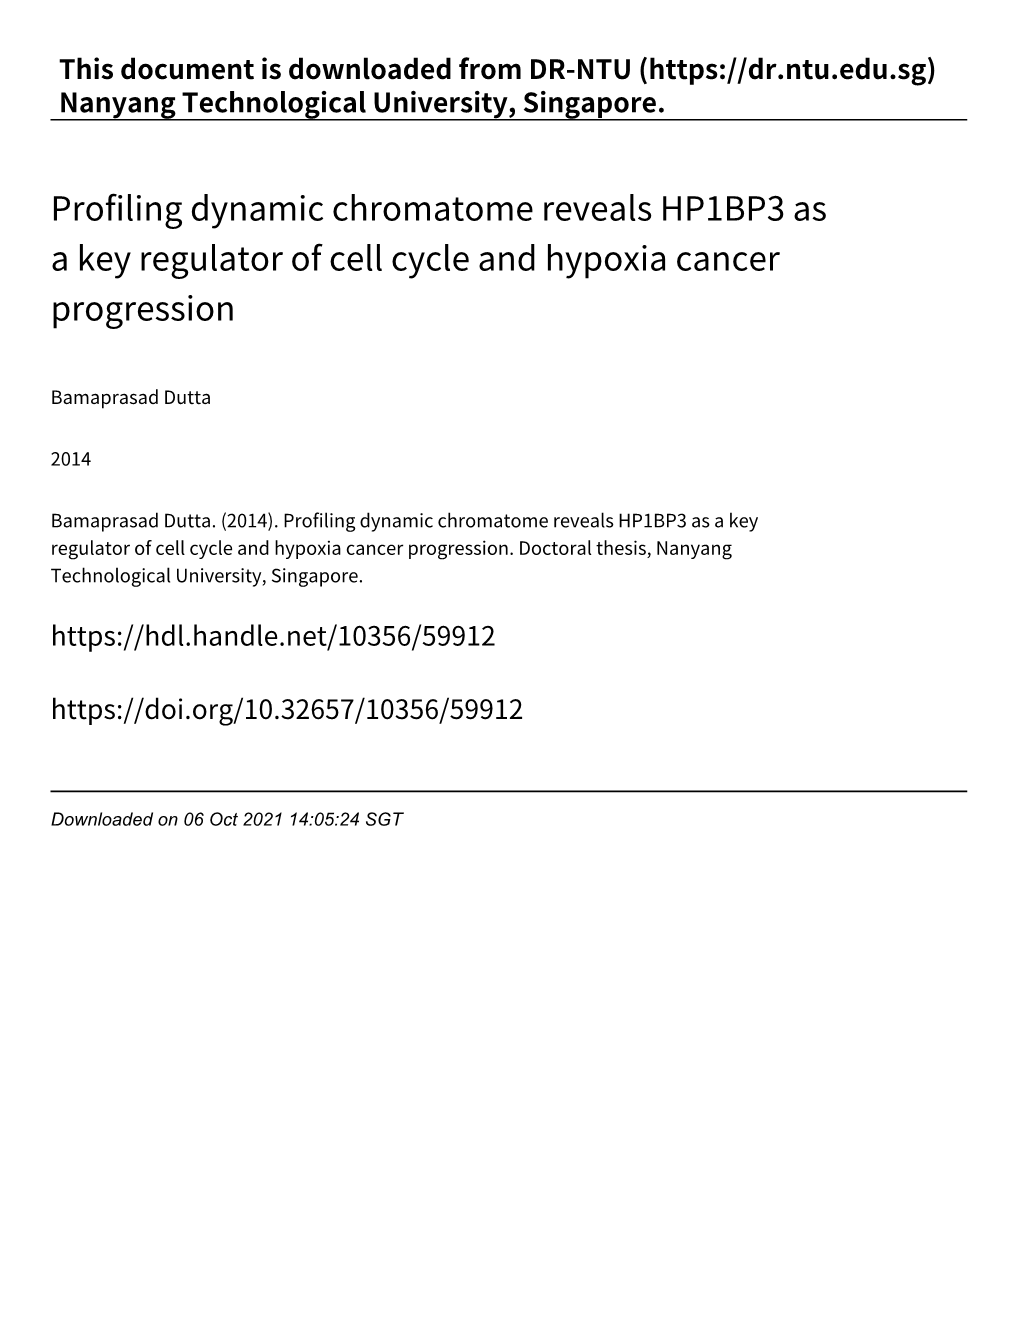 Profiling Dynamic Chromatome Reveals HP1BP3 As a Key Regulator of Cell Cycle and Hypoxia Cancer Progression